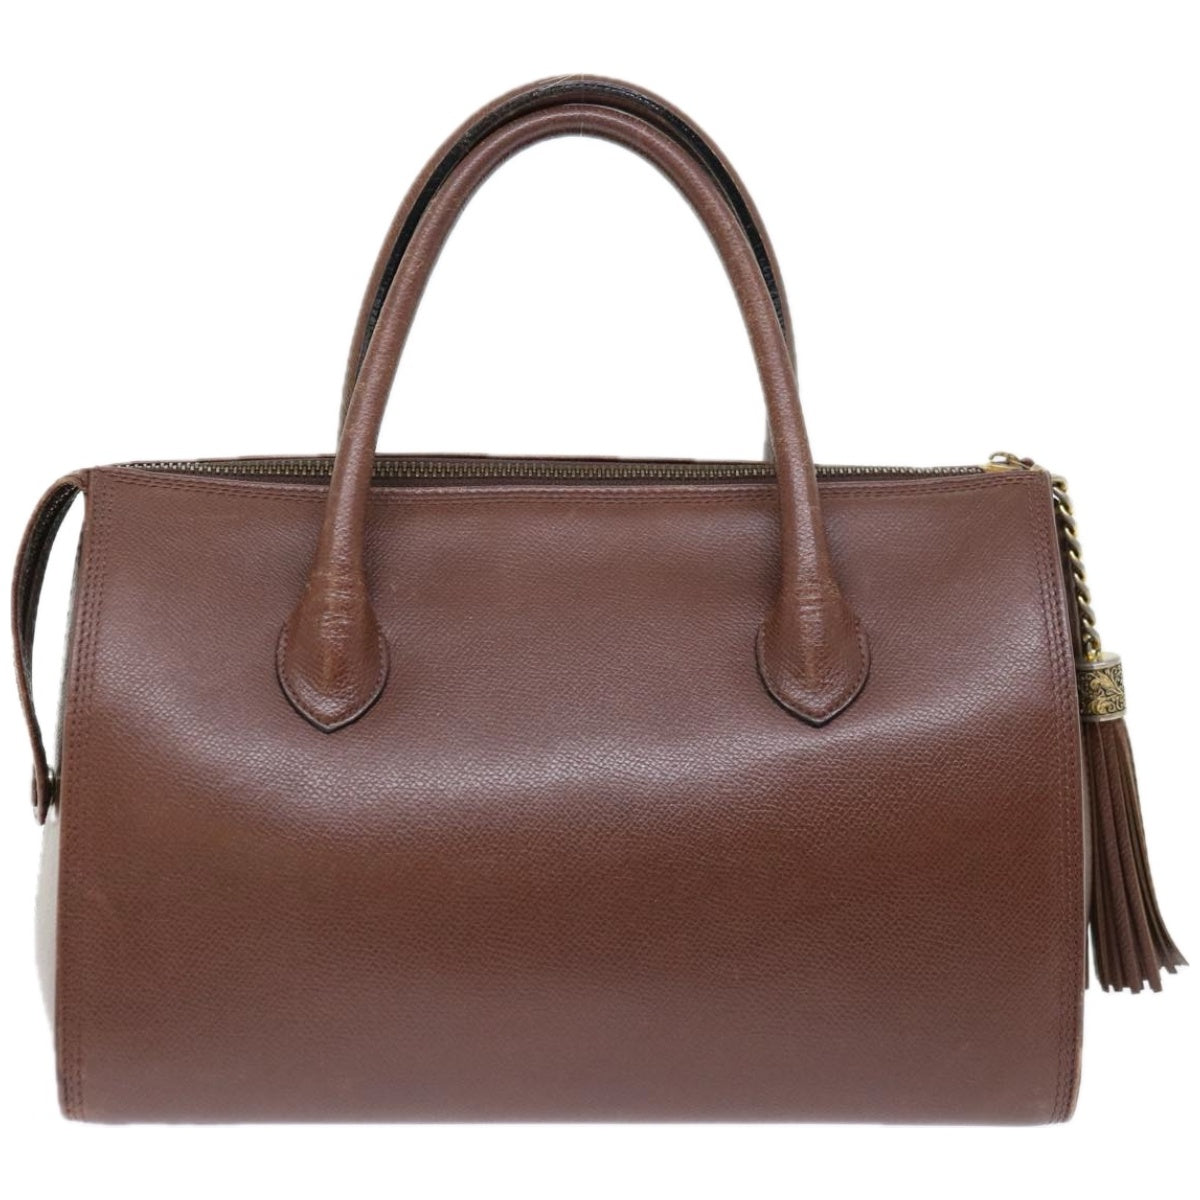 VALENTINO Hand Bag Leather Brown Auth 67071 - 0